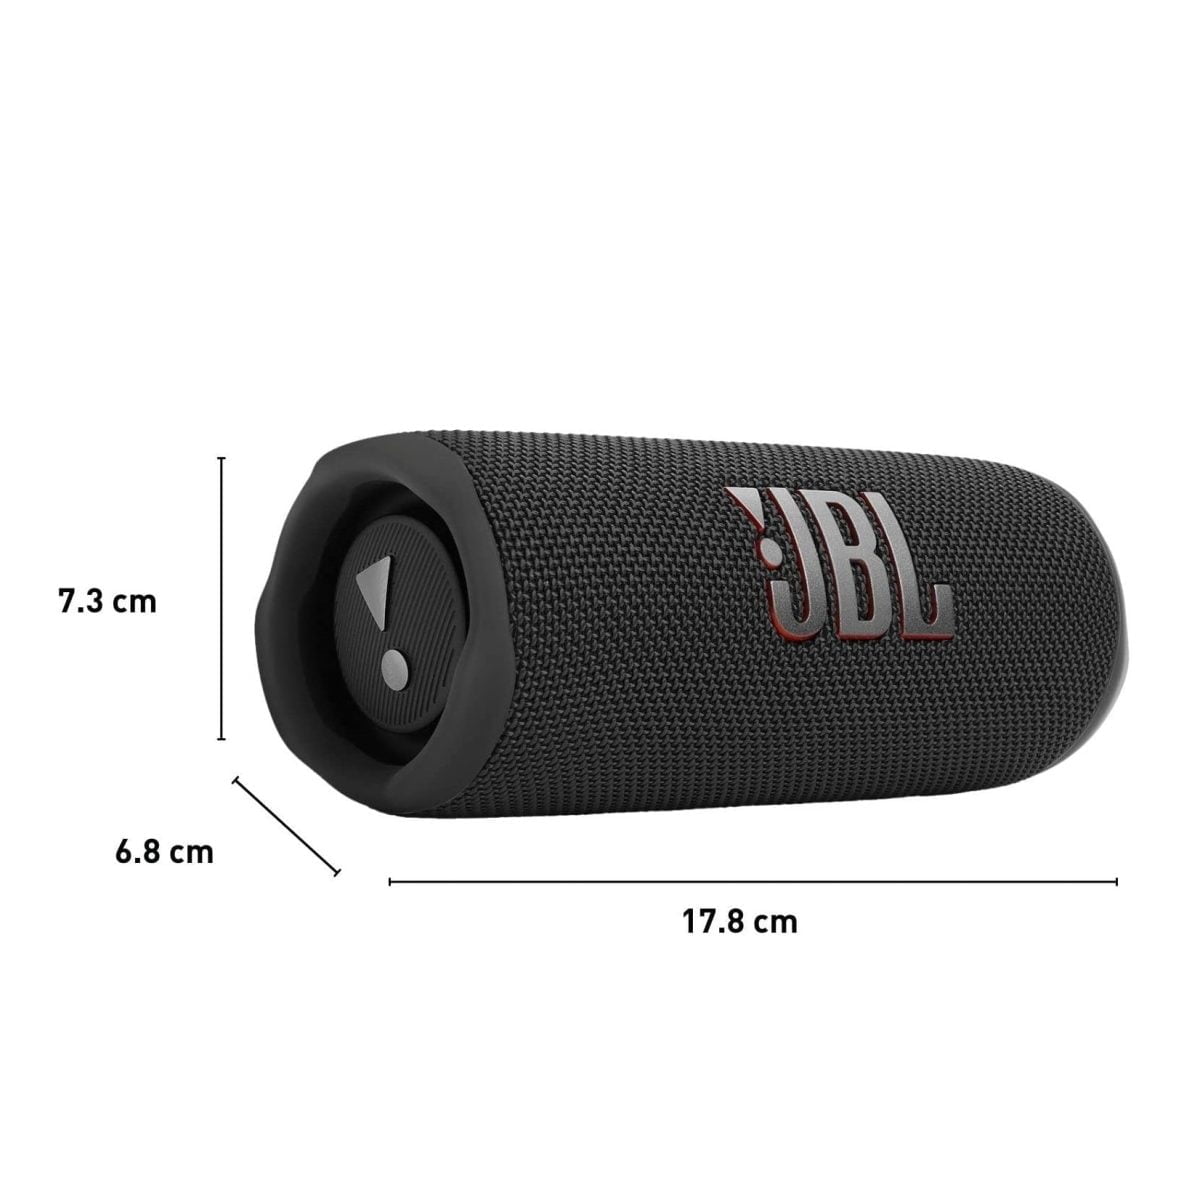 71H6Gnph3Yl. Ac Sl1500 Jbl &Lt;H1&Gt;Jbl Flip 6 Portable Bluetooth Wireless Speaker - Black&Lt;/H1&Gt; Https://Www.youtube.com/Watch?V=F6Waogaxhme Bold Sound For Every Adventure. Your Adventure. Your Soundtrack. The Bold New Jbl Flip 6 Delivers Powerful Jbl Original Pro Sound With Exceptional Clarity Thanks To Its 2-Way Speaker System Consisting Of An Optimized Racetrack-Shaped Driver, Separate Tweeter, And Dual Pumping Bass Radiators. This Big-Sounding, Yet Easy To Carry Speaker Is Waterproof And Dustproof, So You Can Take It Anywhere In Any Weather. And With 12 Hours Of Battery Life, You Can Party ‘Til The Sun Goes Down—Or Comes Up—Wherever The Music Moves You. Use Partyboost To Link Multiple Compatible Speakers. The Flip 6 Comes In A Variety Of Cool Colors. Jbl Flip5 Grey Jbl Flip 6 Portable Bluetooth Wireless Speaker - Black